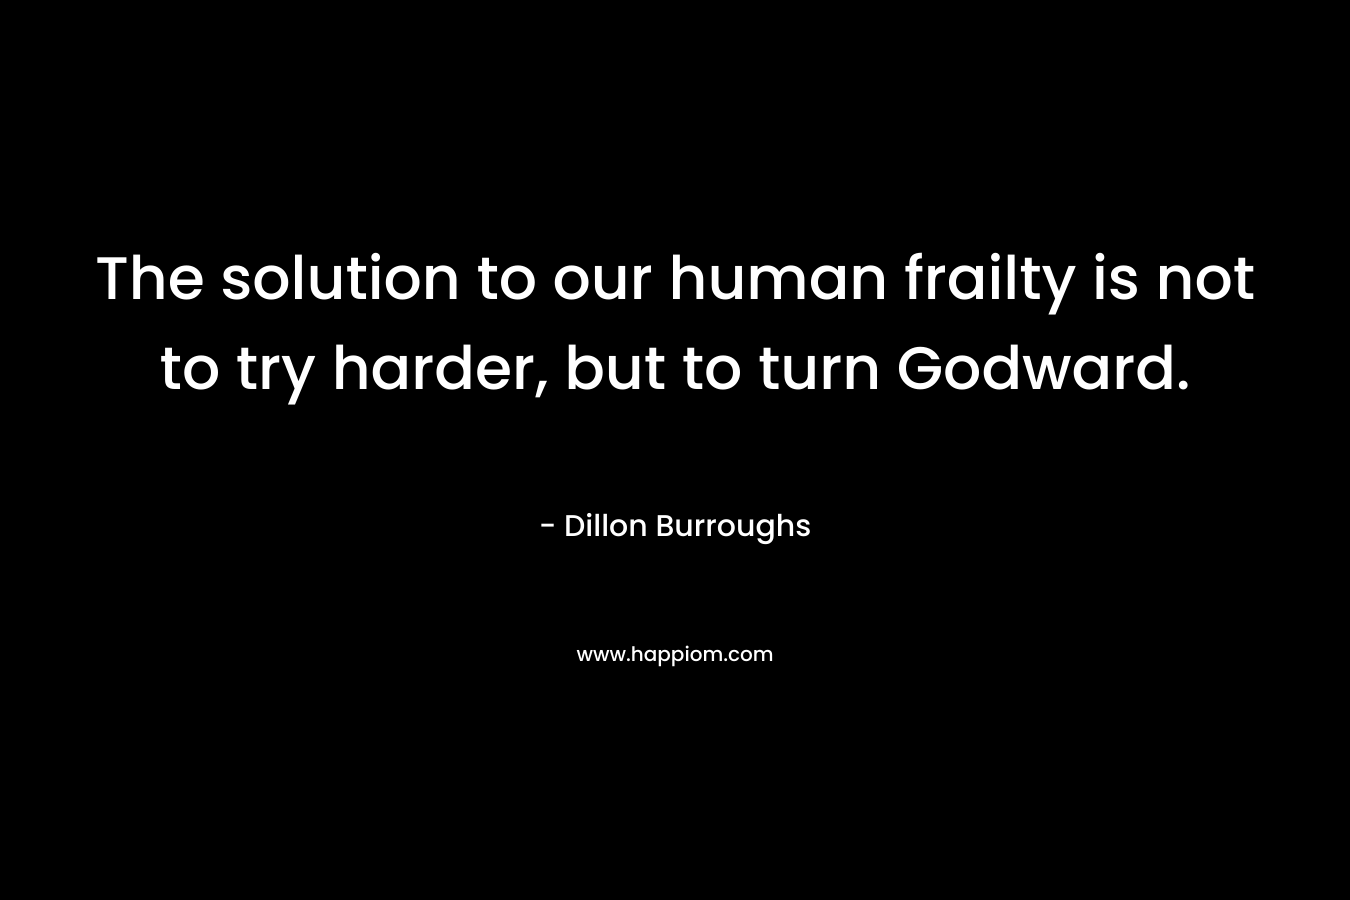 The solution to our human frailty is not to try harder, but to turn Godward.